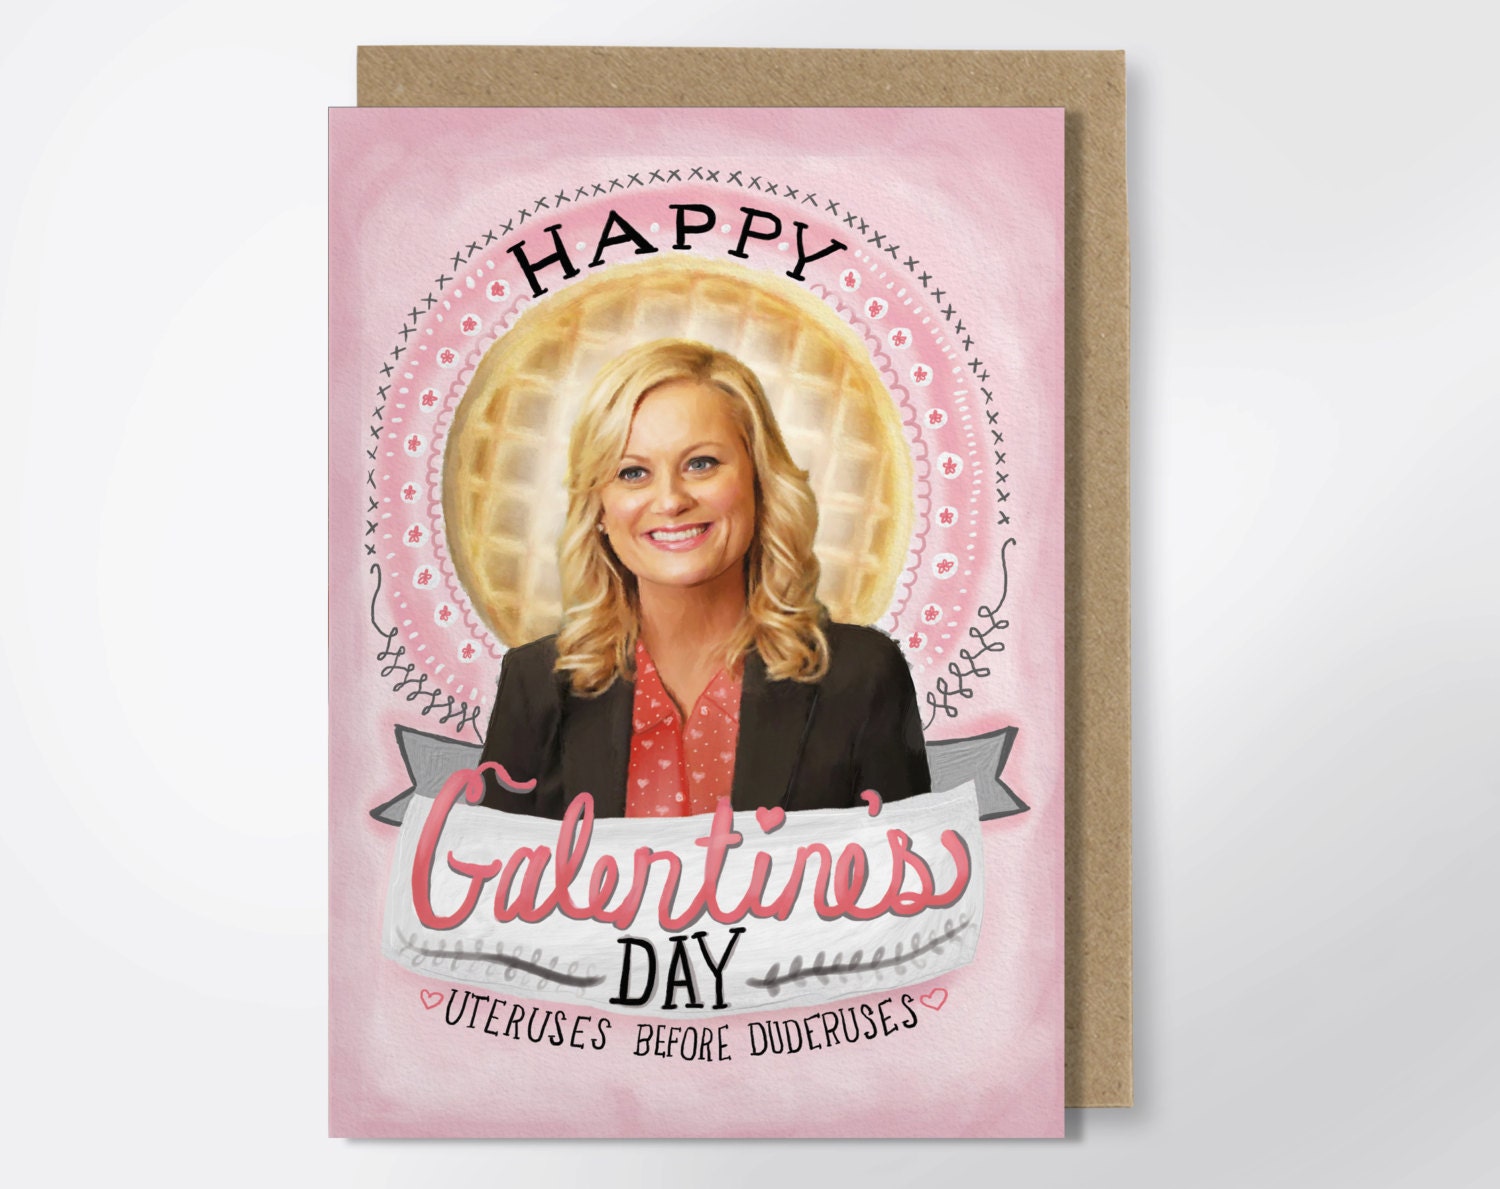 Happy Galentine's Day Leslie Knope Greeting Card1500 x 1189